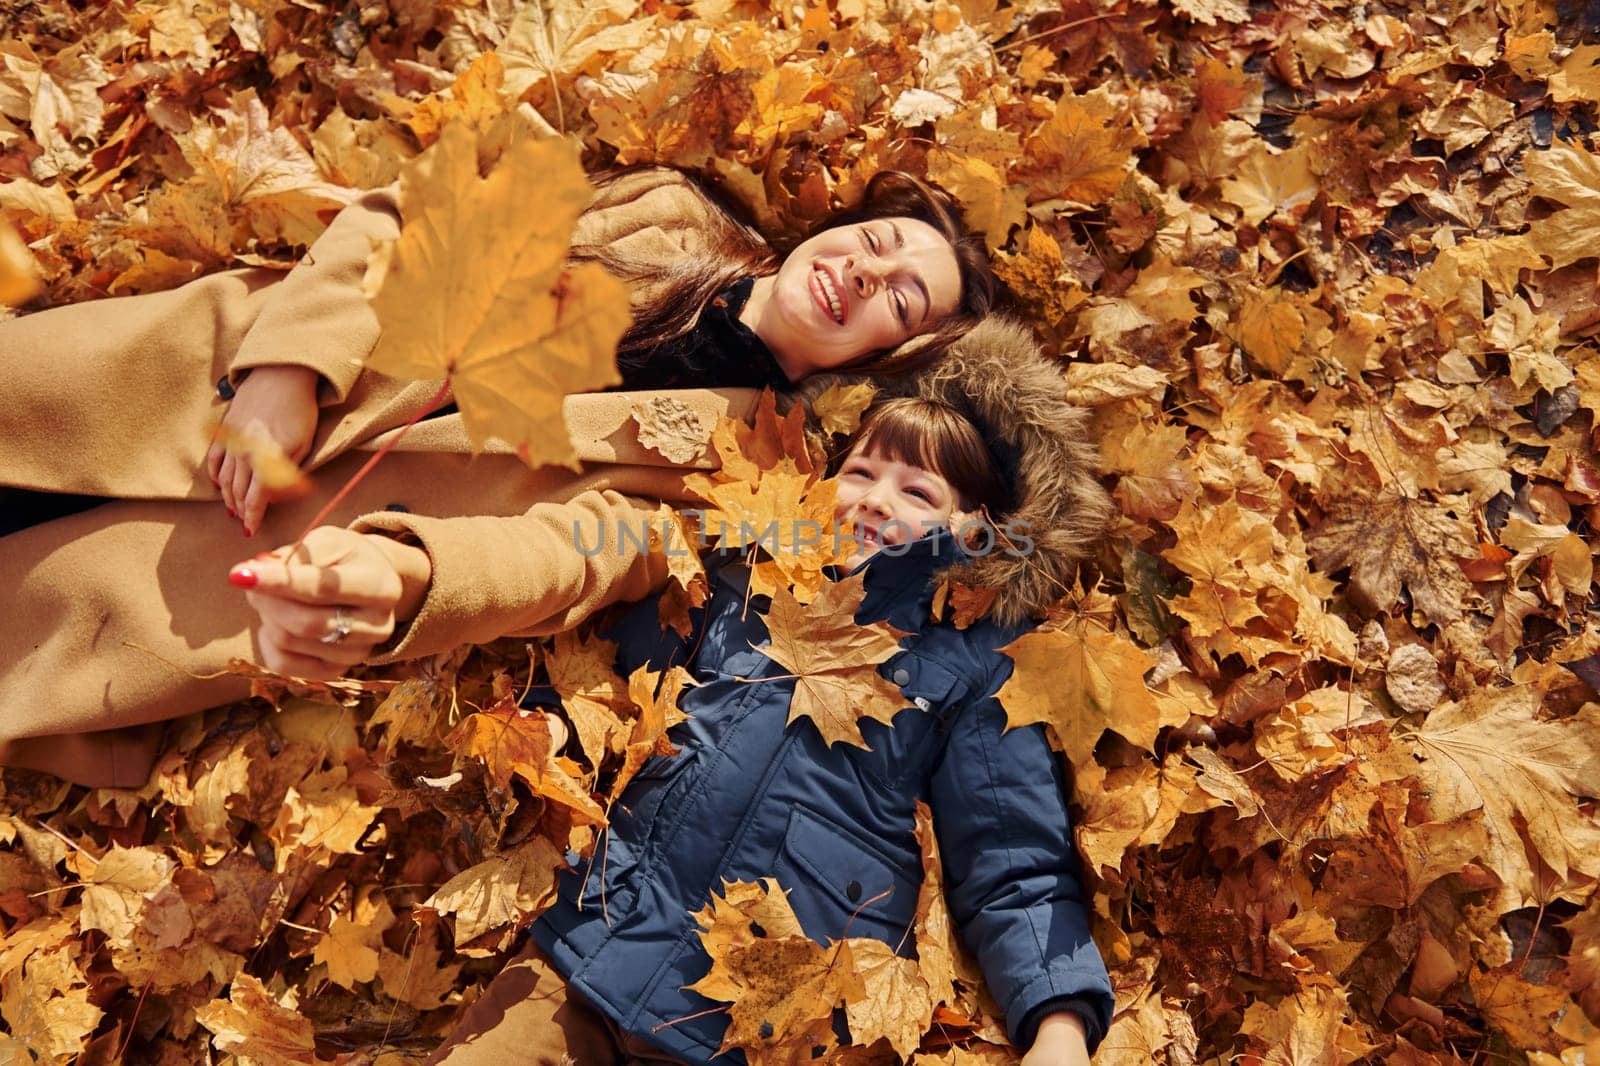 Laying down on the leaves. Mother with her son is having fun outdoors in the autumn forest by Standret